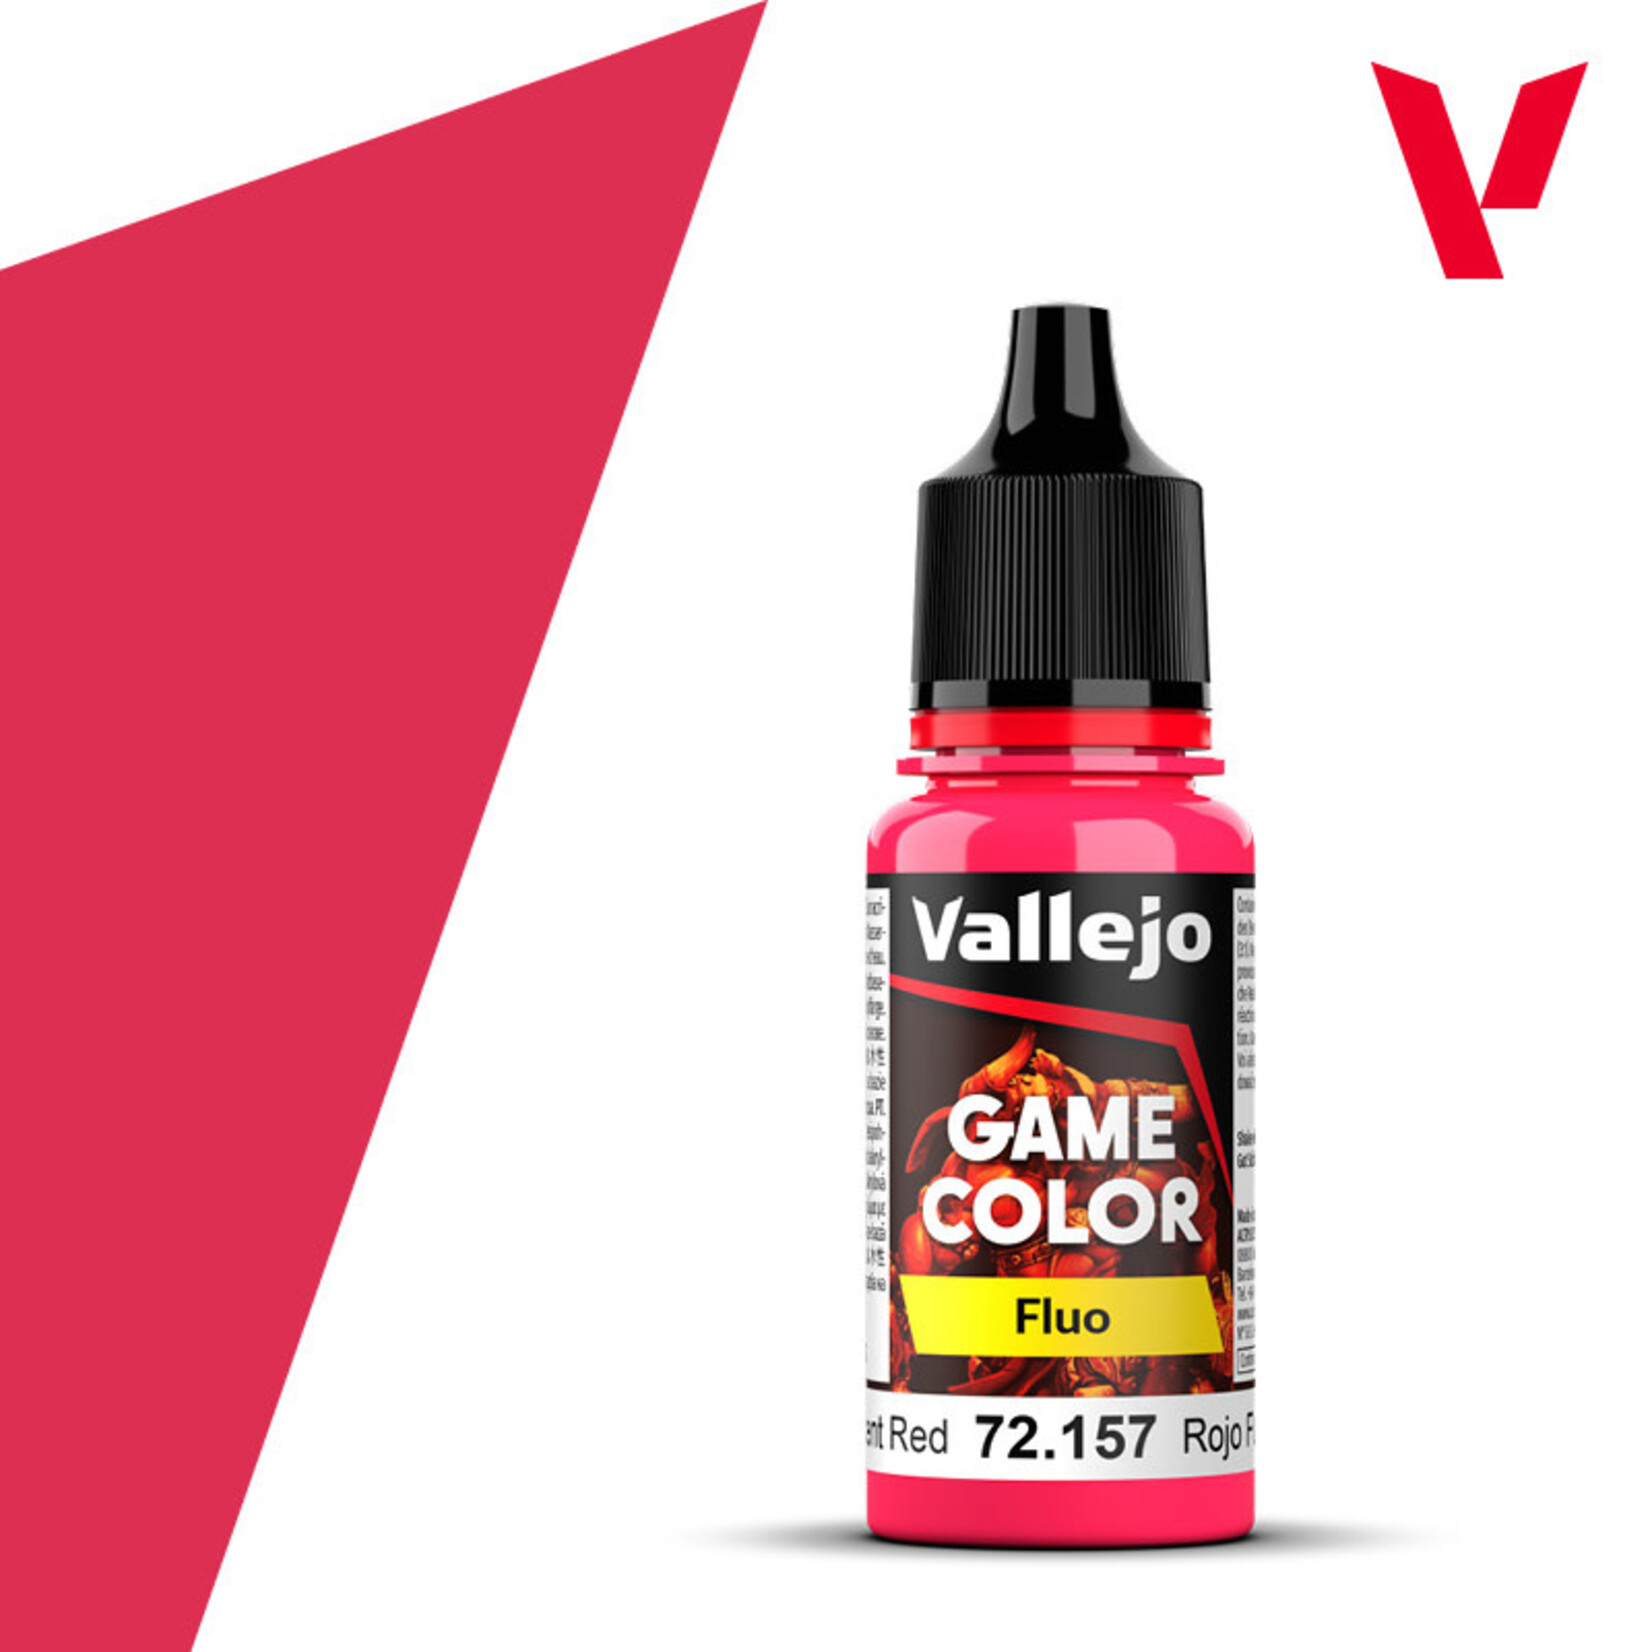 Vallejo Game Color Fluorescent Red